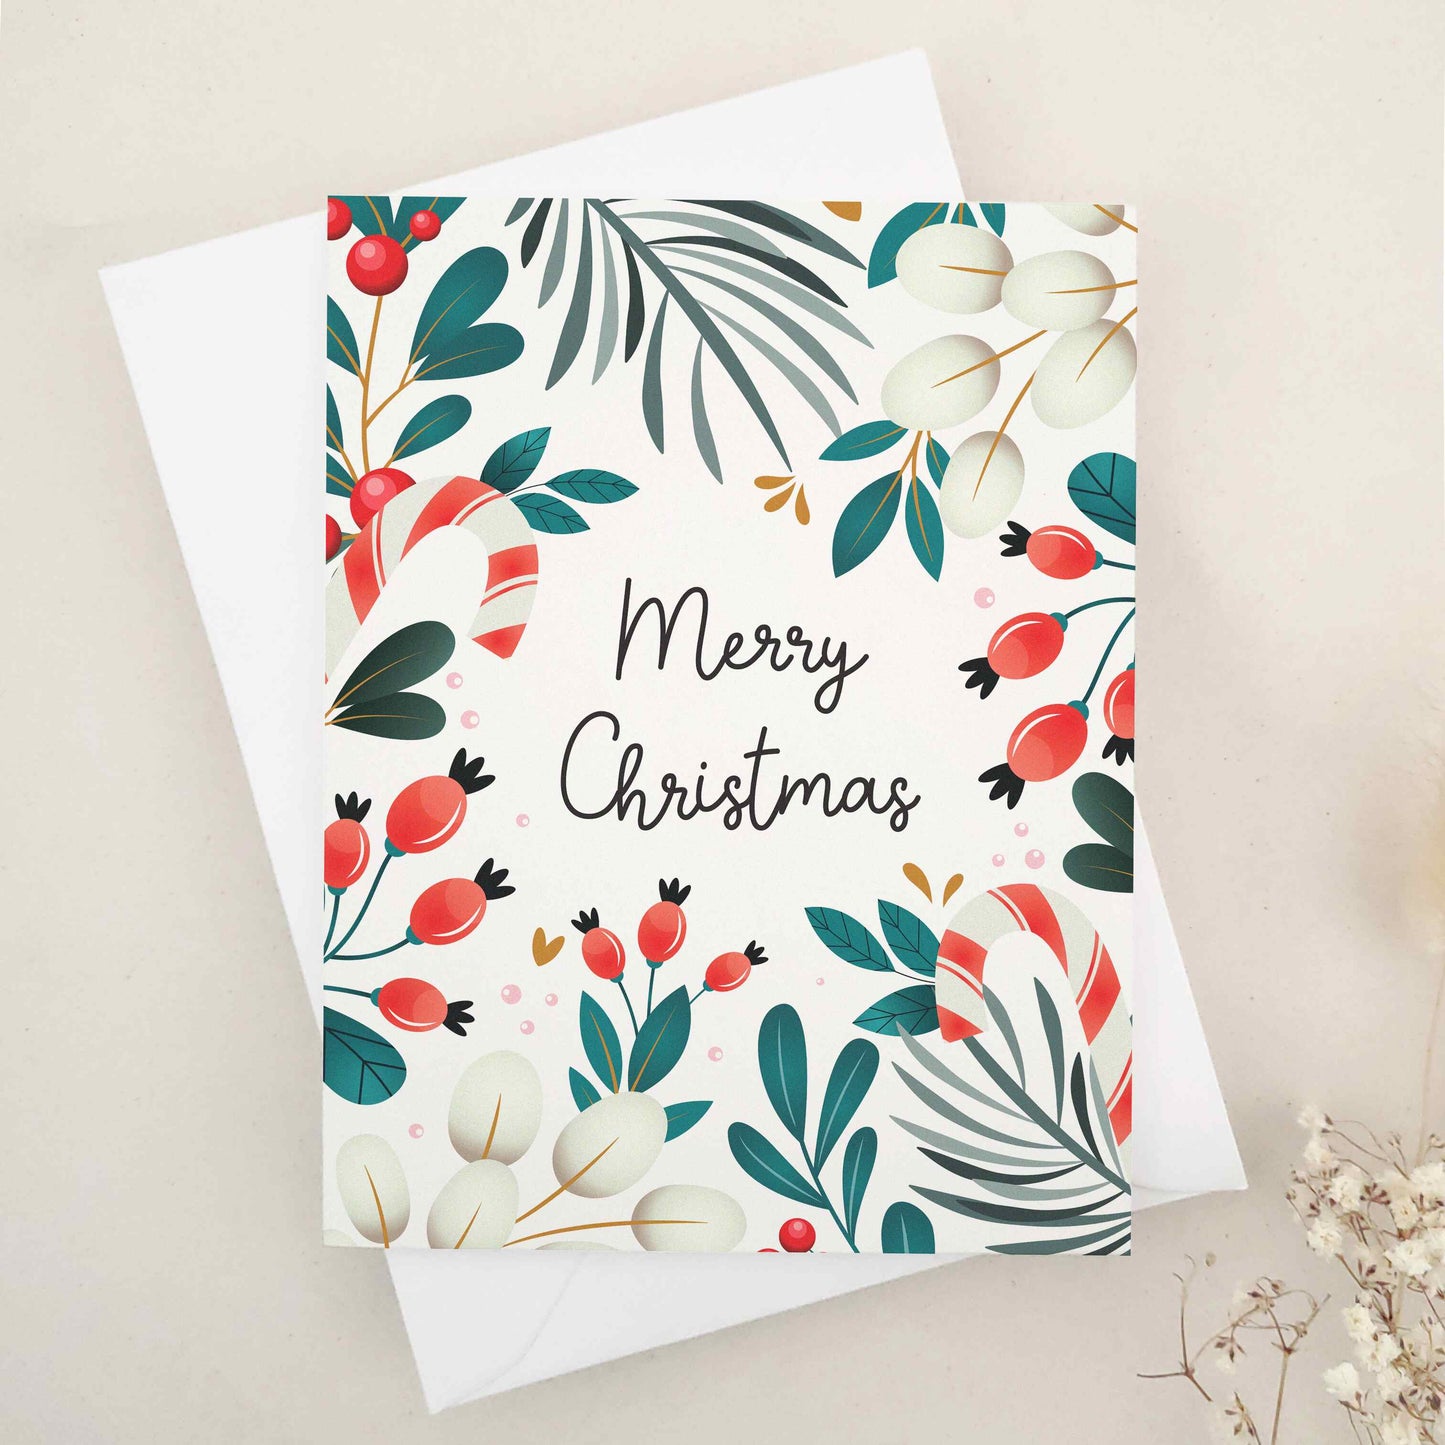 Share the warmth and joy of the holiday season with our beautiful 'Merry Christmas' card, featuring an elegant array of festive motifs including mistletoe, berries, and candy canes against a traditional winter backdrop, a perfect canvas for sending your holiday wishes.